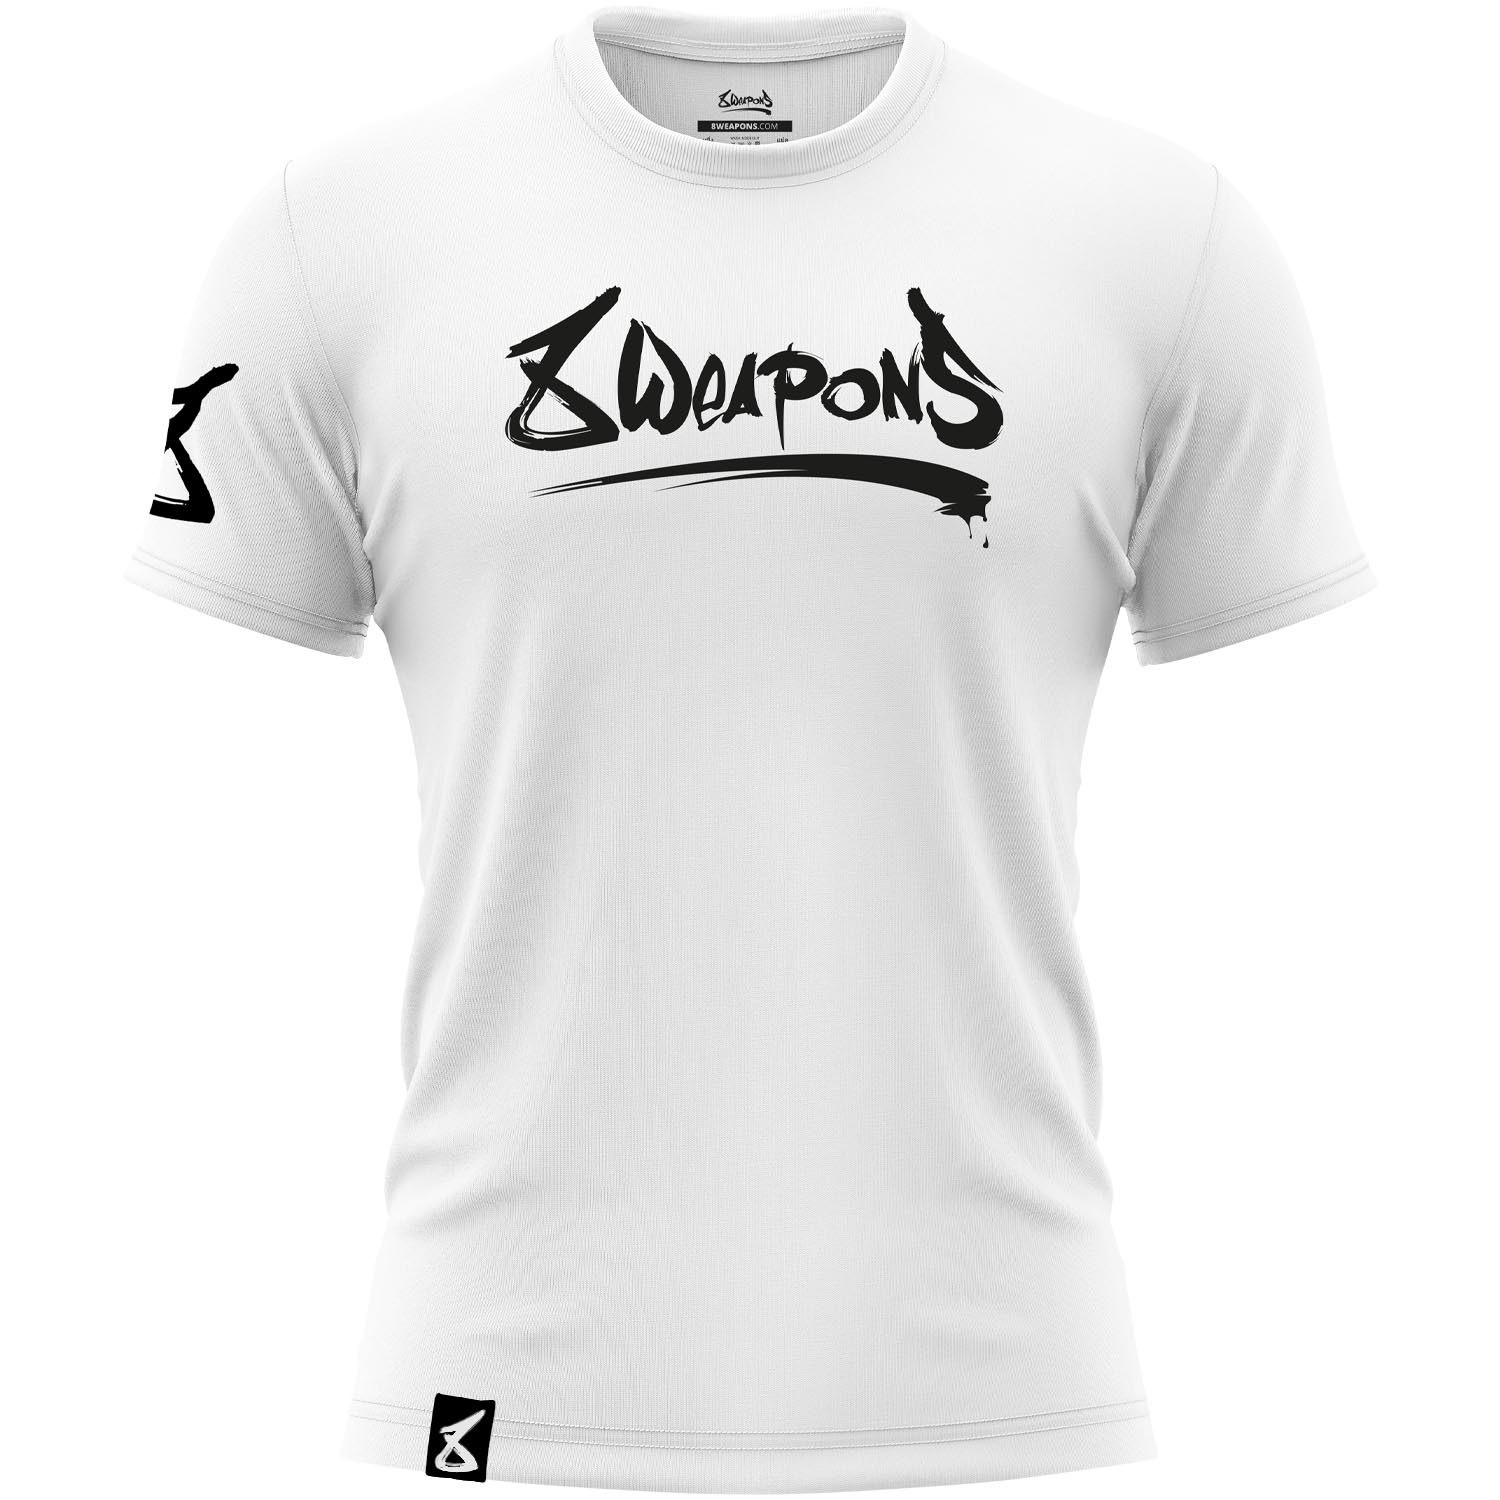 8 WEAPONS T-Shirt, Unlimited 2.0, white, L